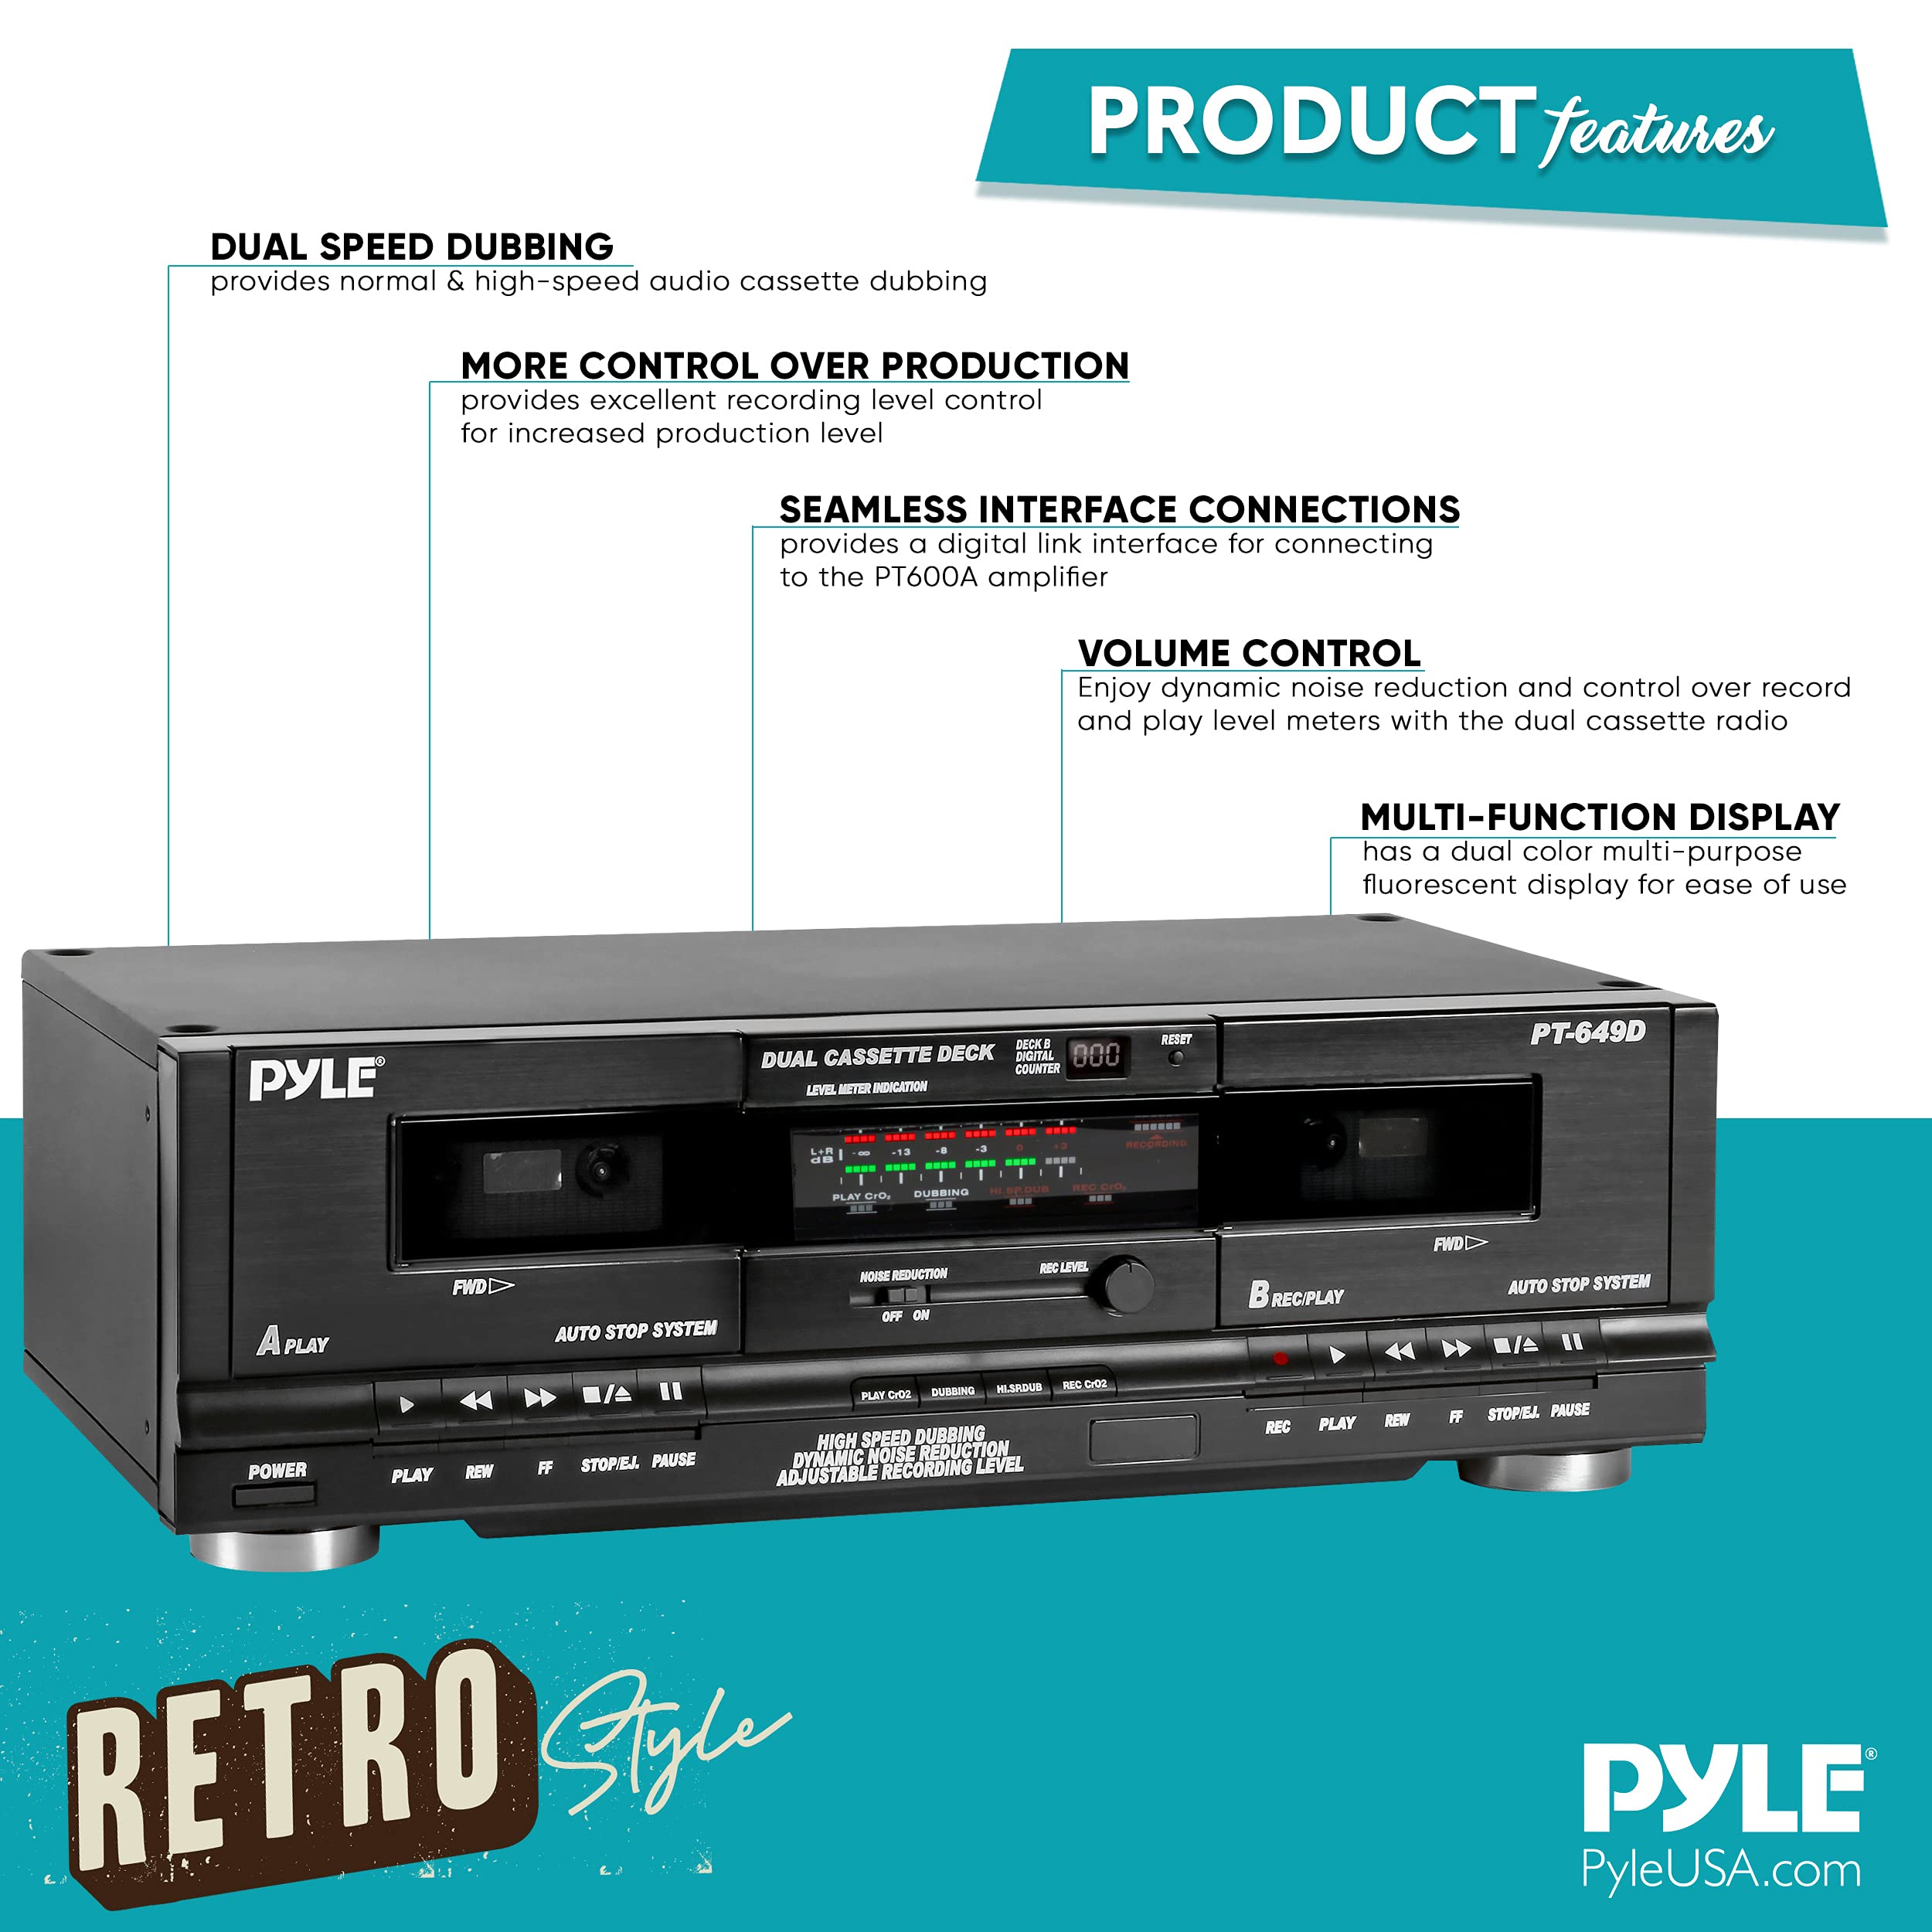 PyleUsa Dual Stereo Cassette Tape Deck-Clear Audio Double Player Recorder System w/ MP3 Music Converter, RCA for Recording, Dubbing, USB, Retro Design - for Standard/CrO2 Tapes, Home Use - PT659DU.5